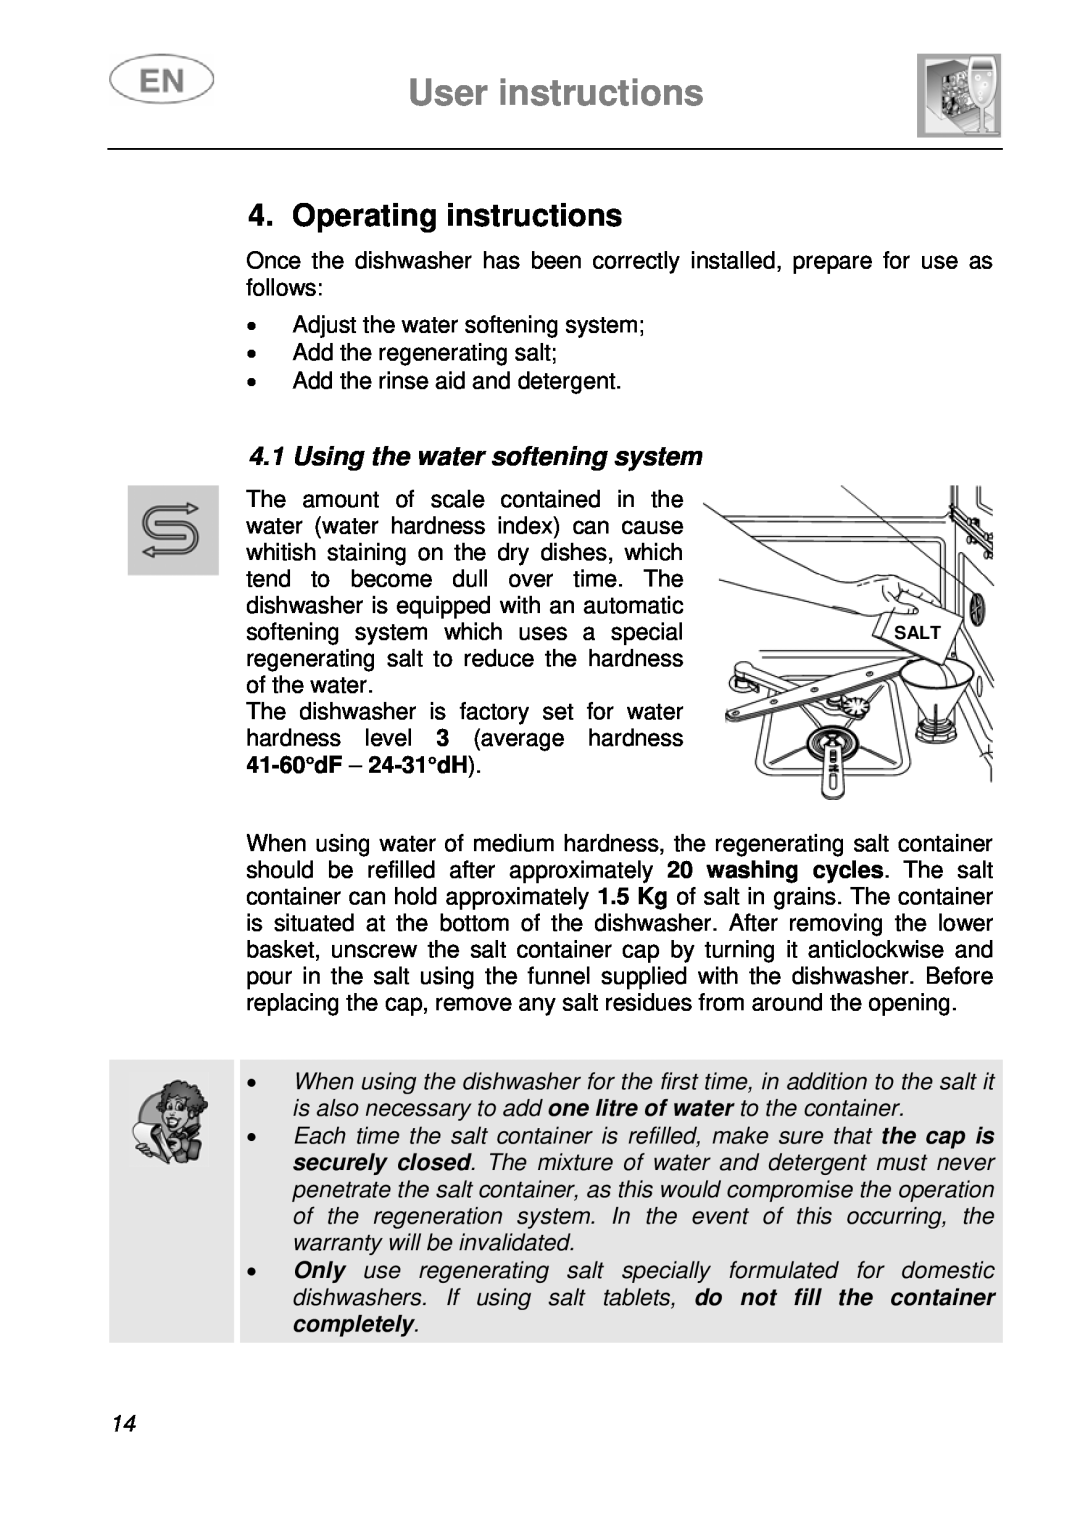 Smeg ST4108 manual Operating instructions, 4.1Using the water softening system, User instructions 